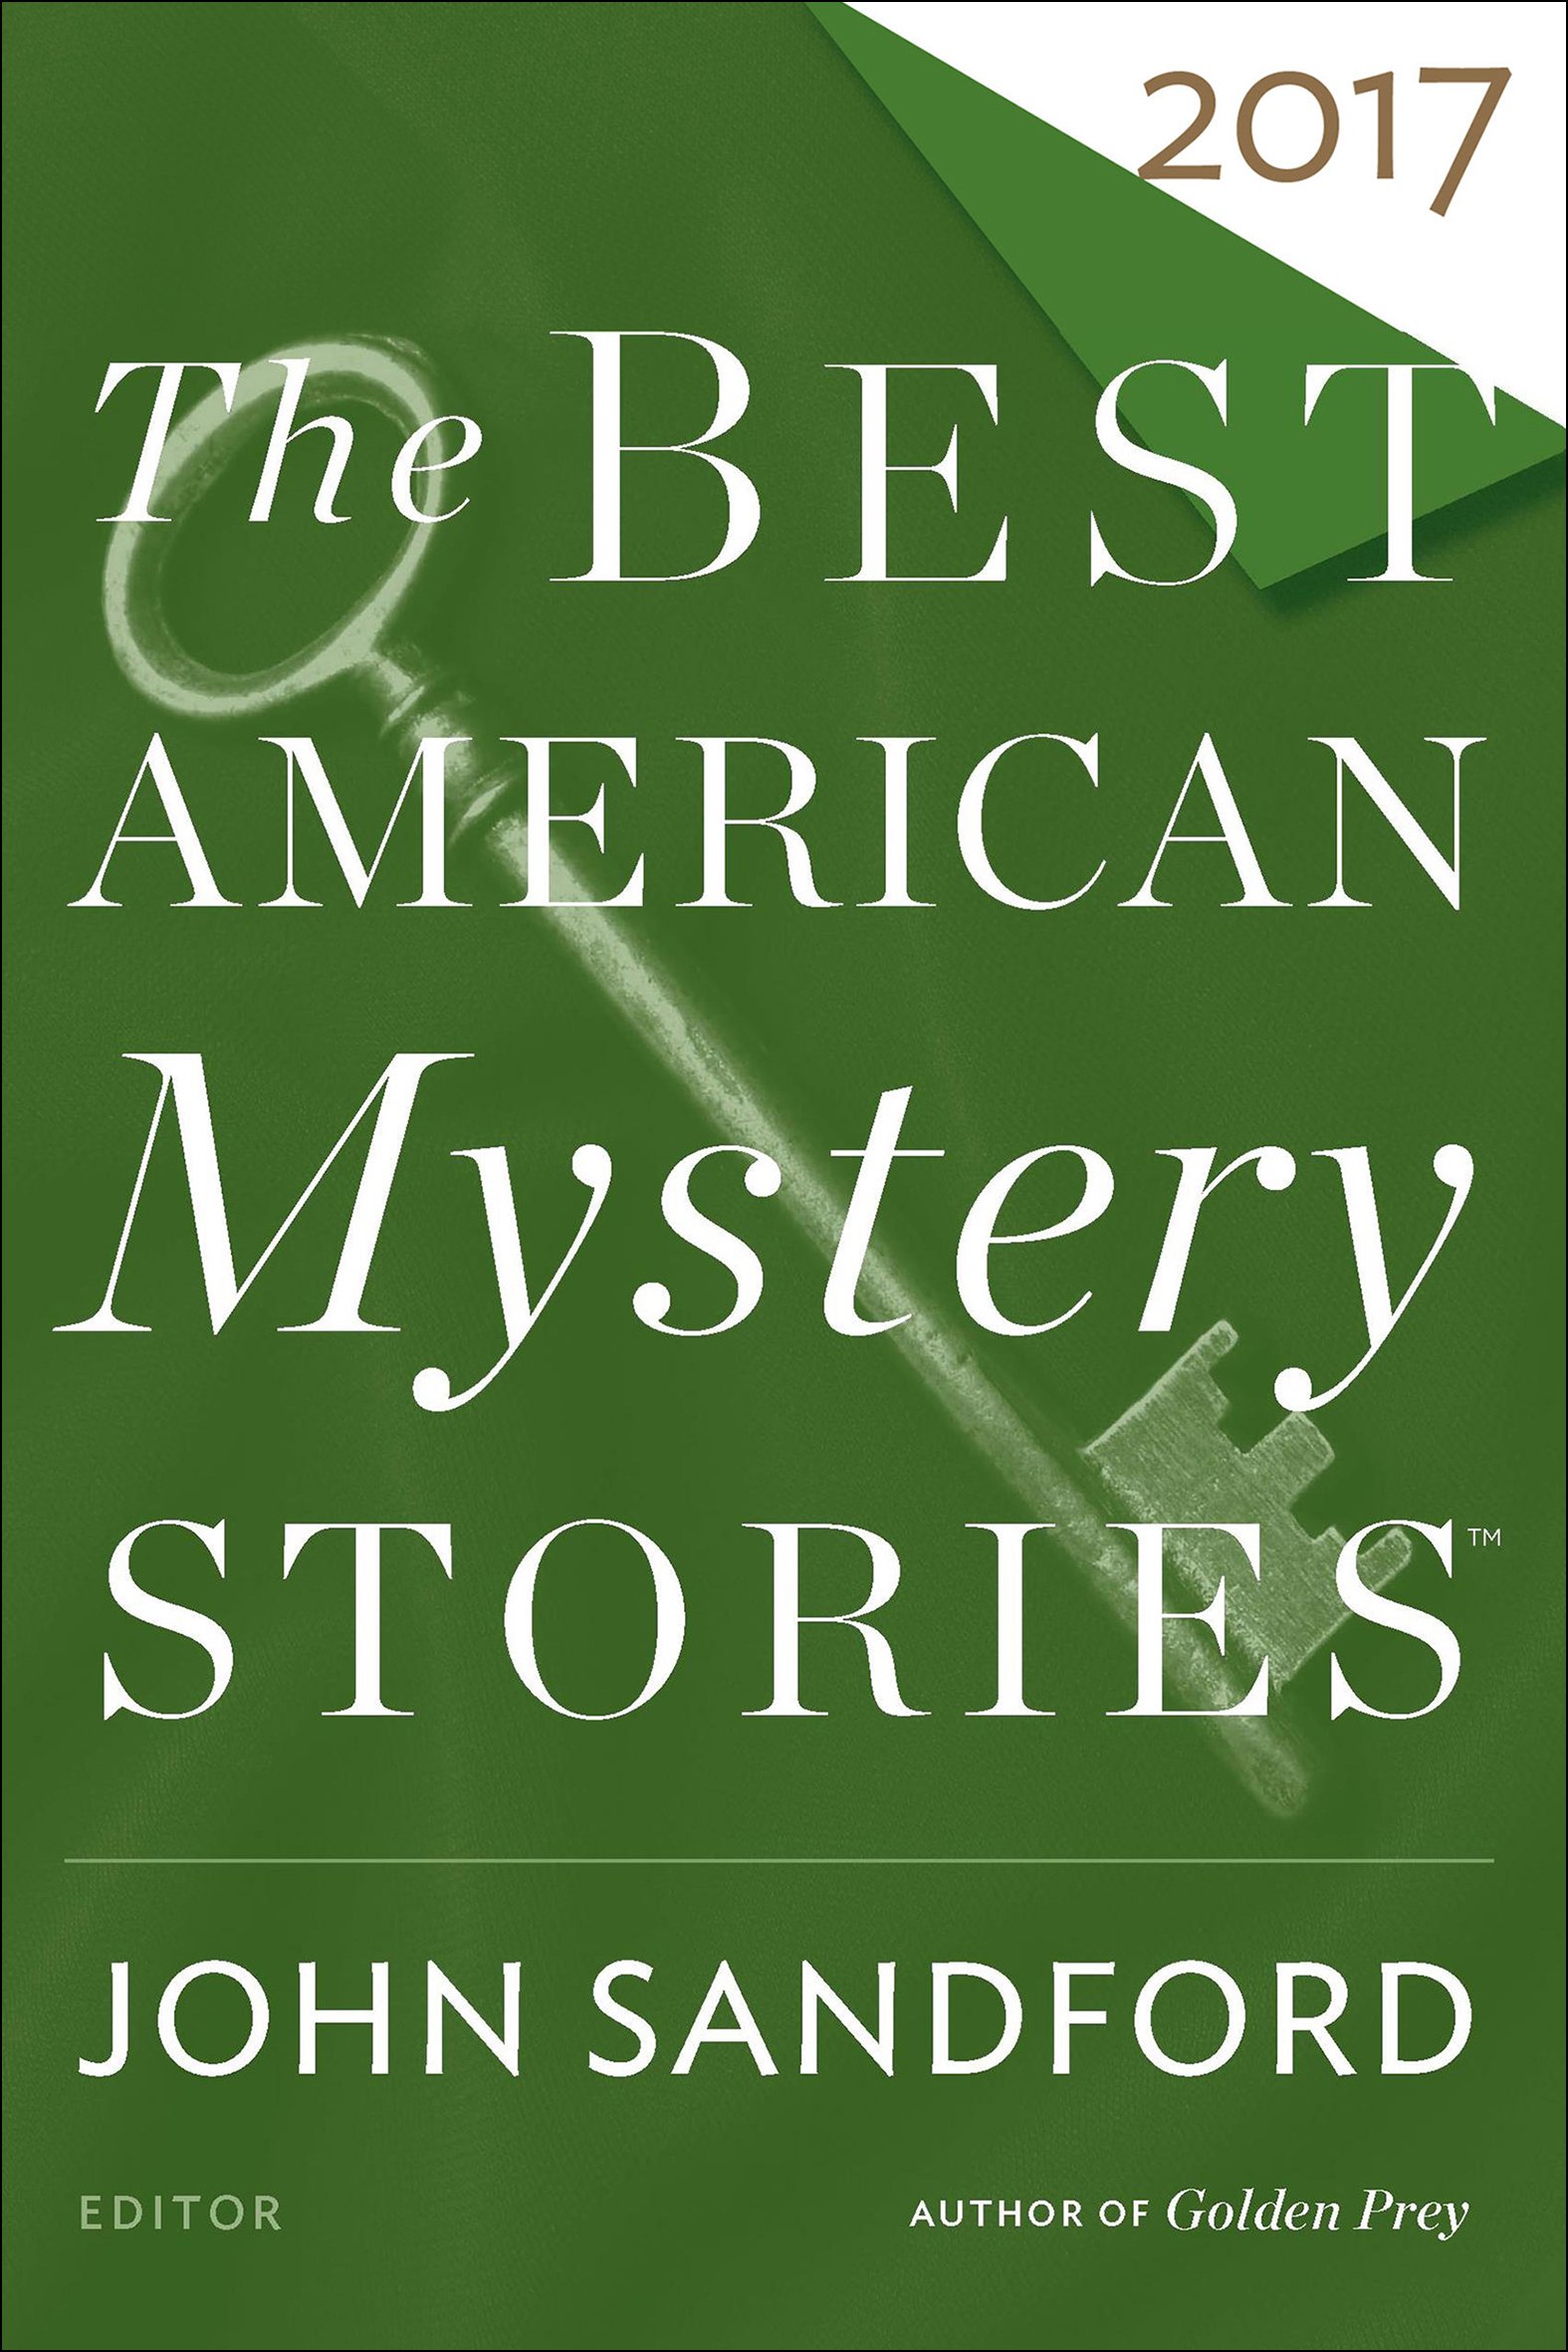 The best American mystery stories 2017 cover image